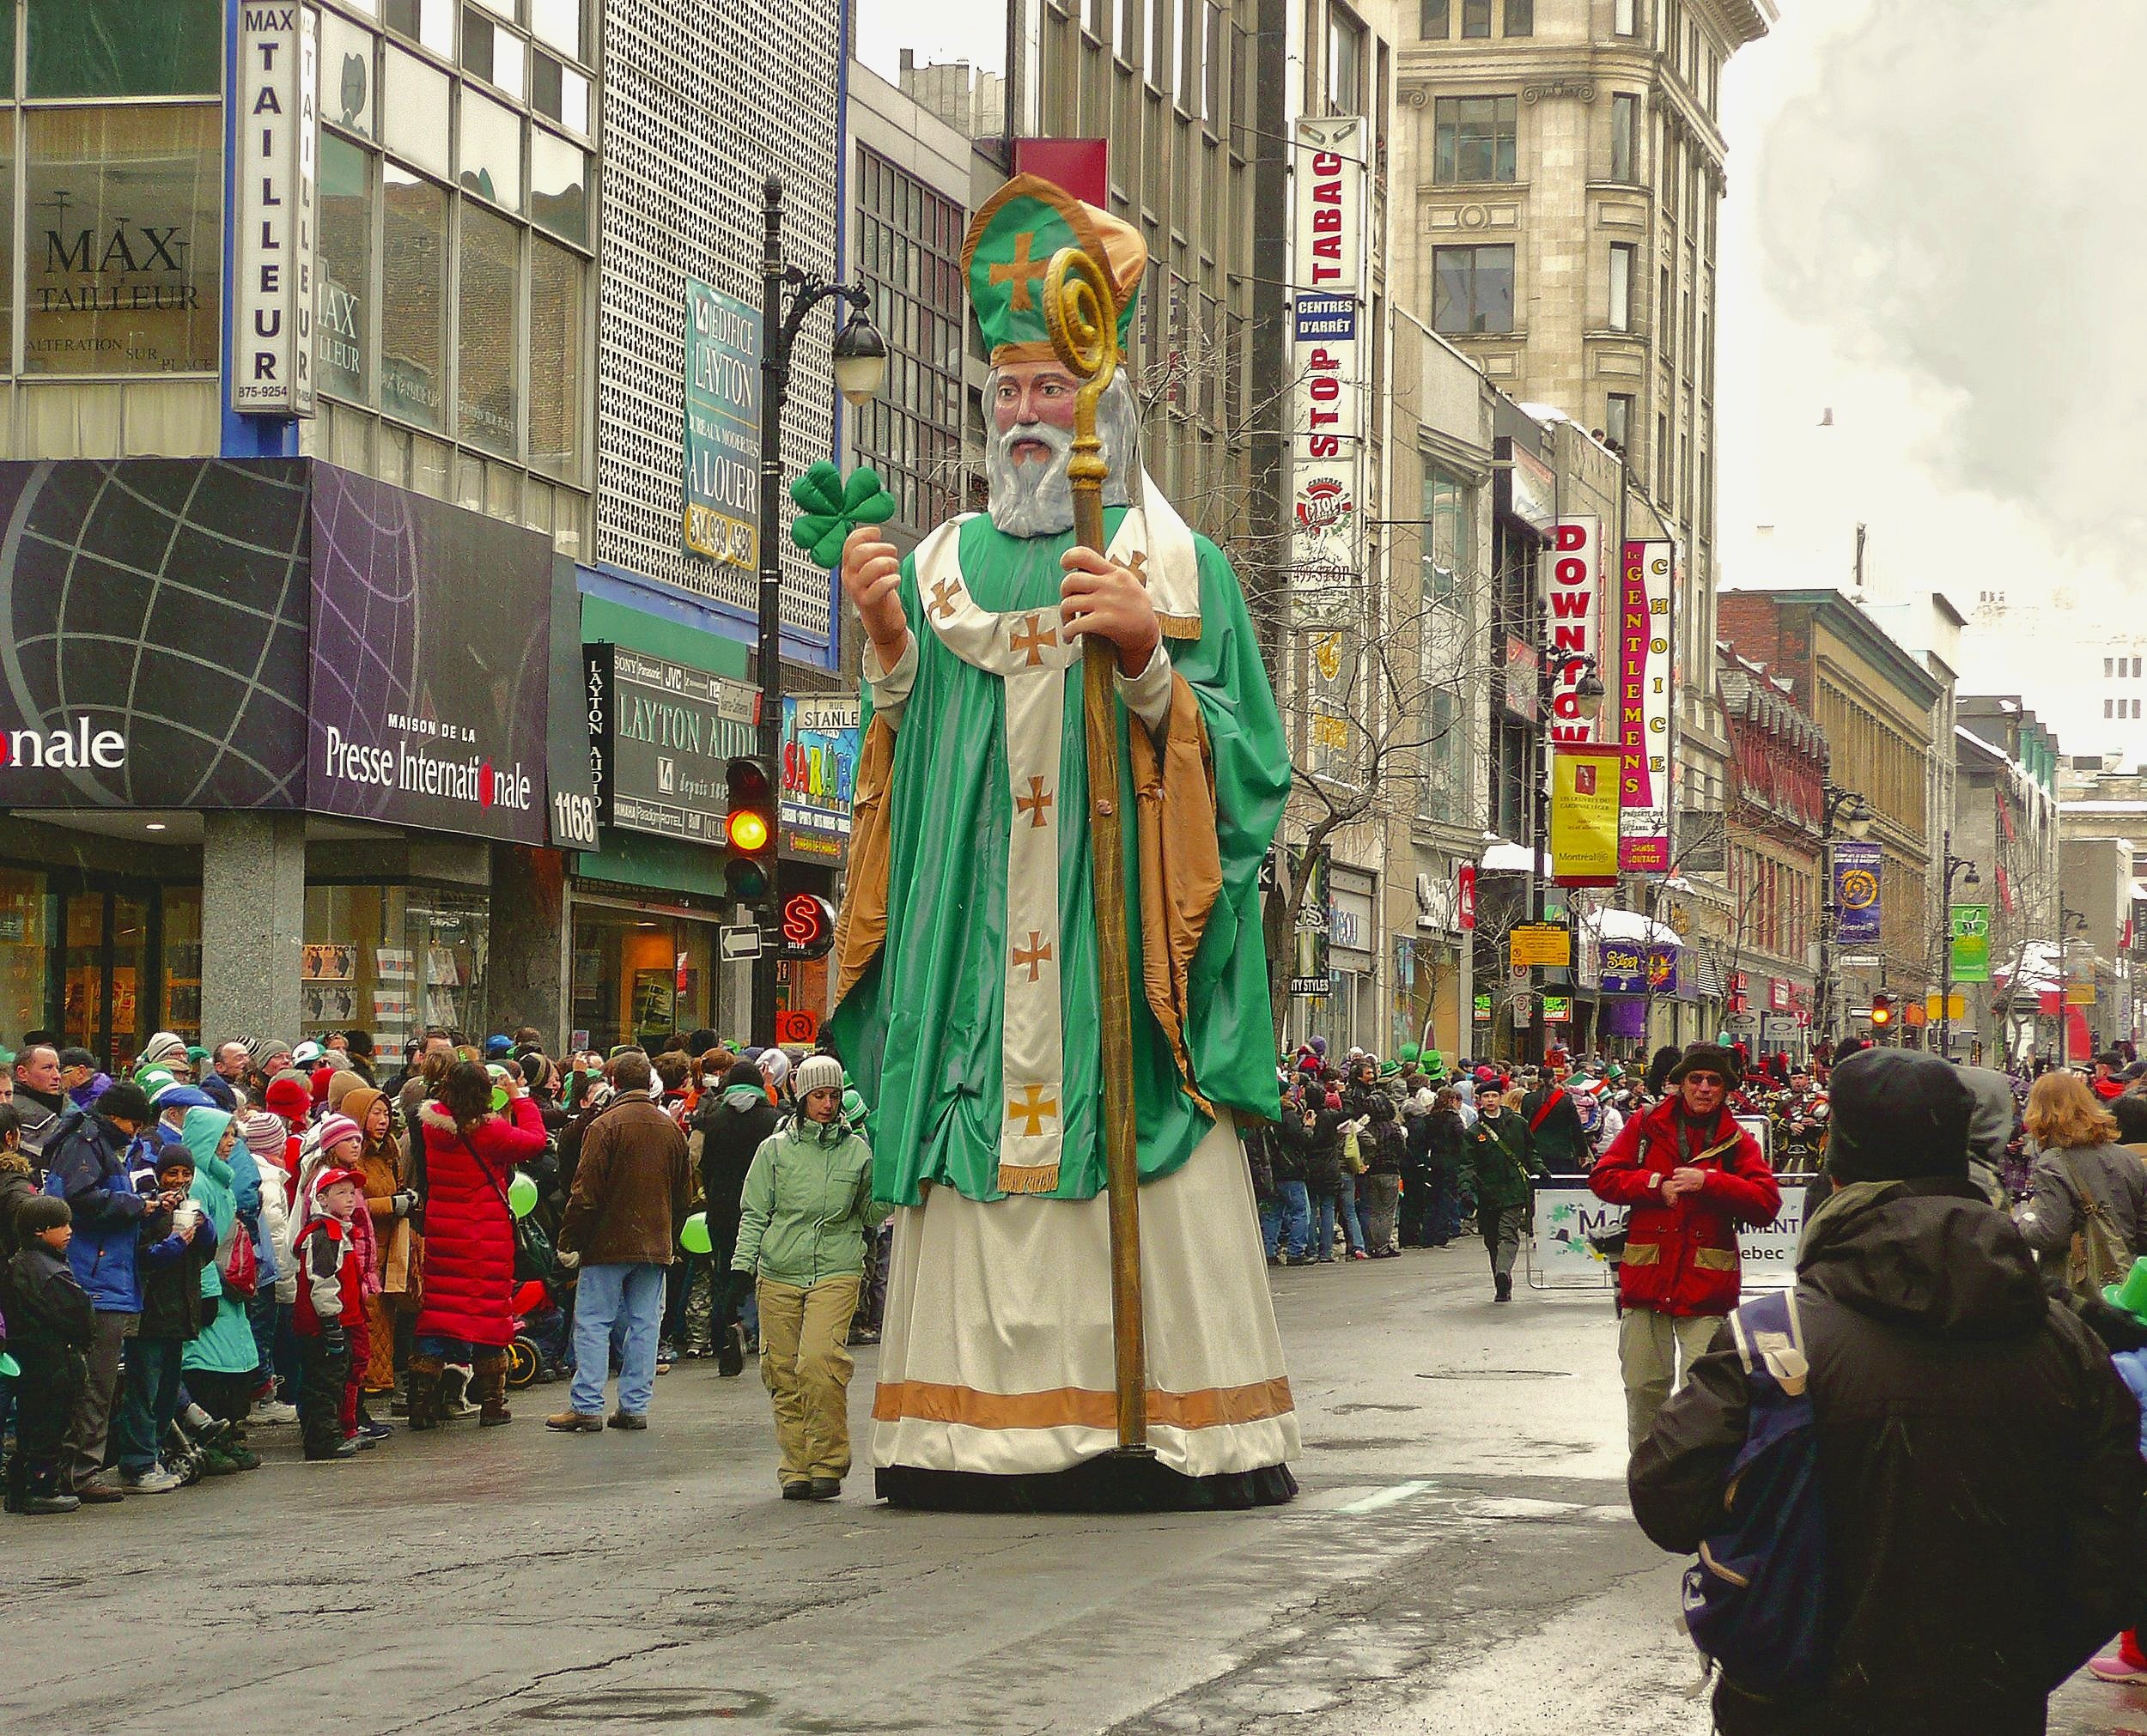 St. Patrick's image in a parade